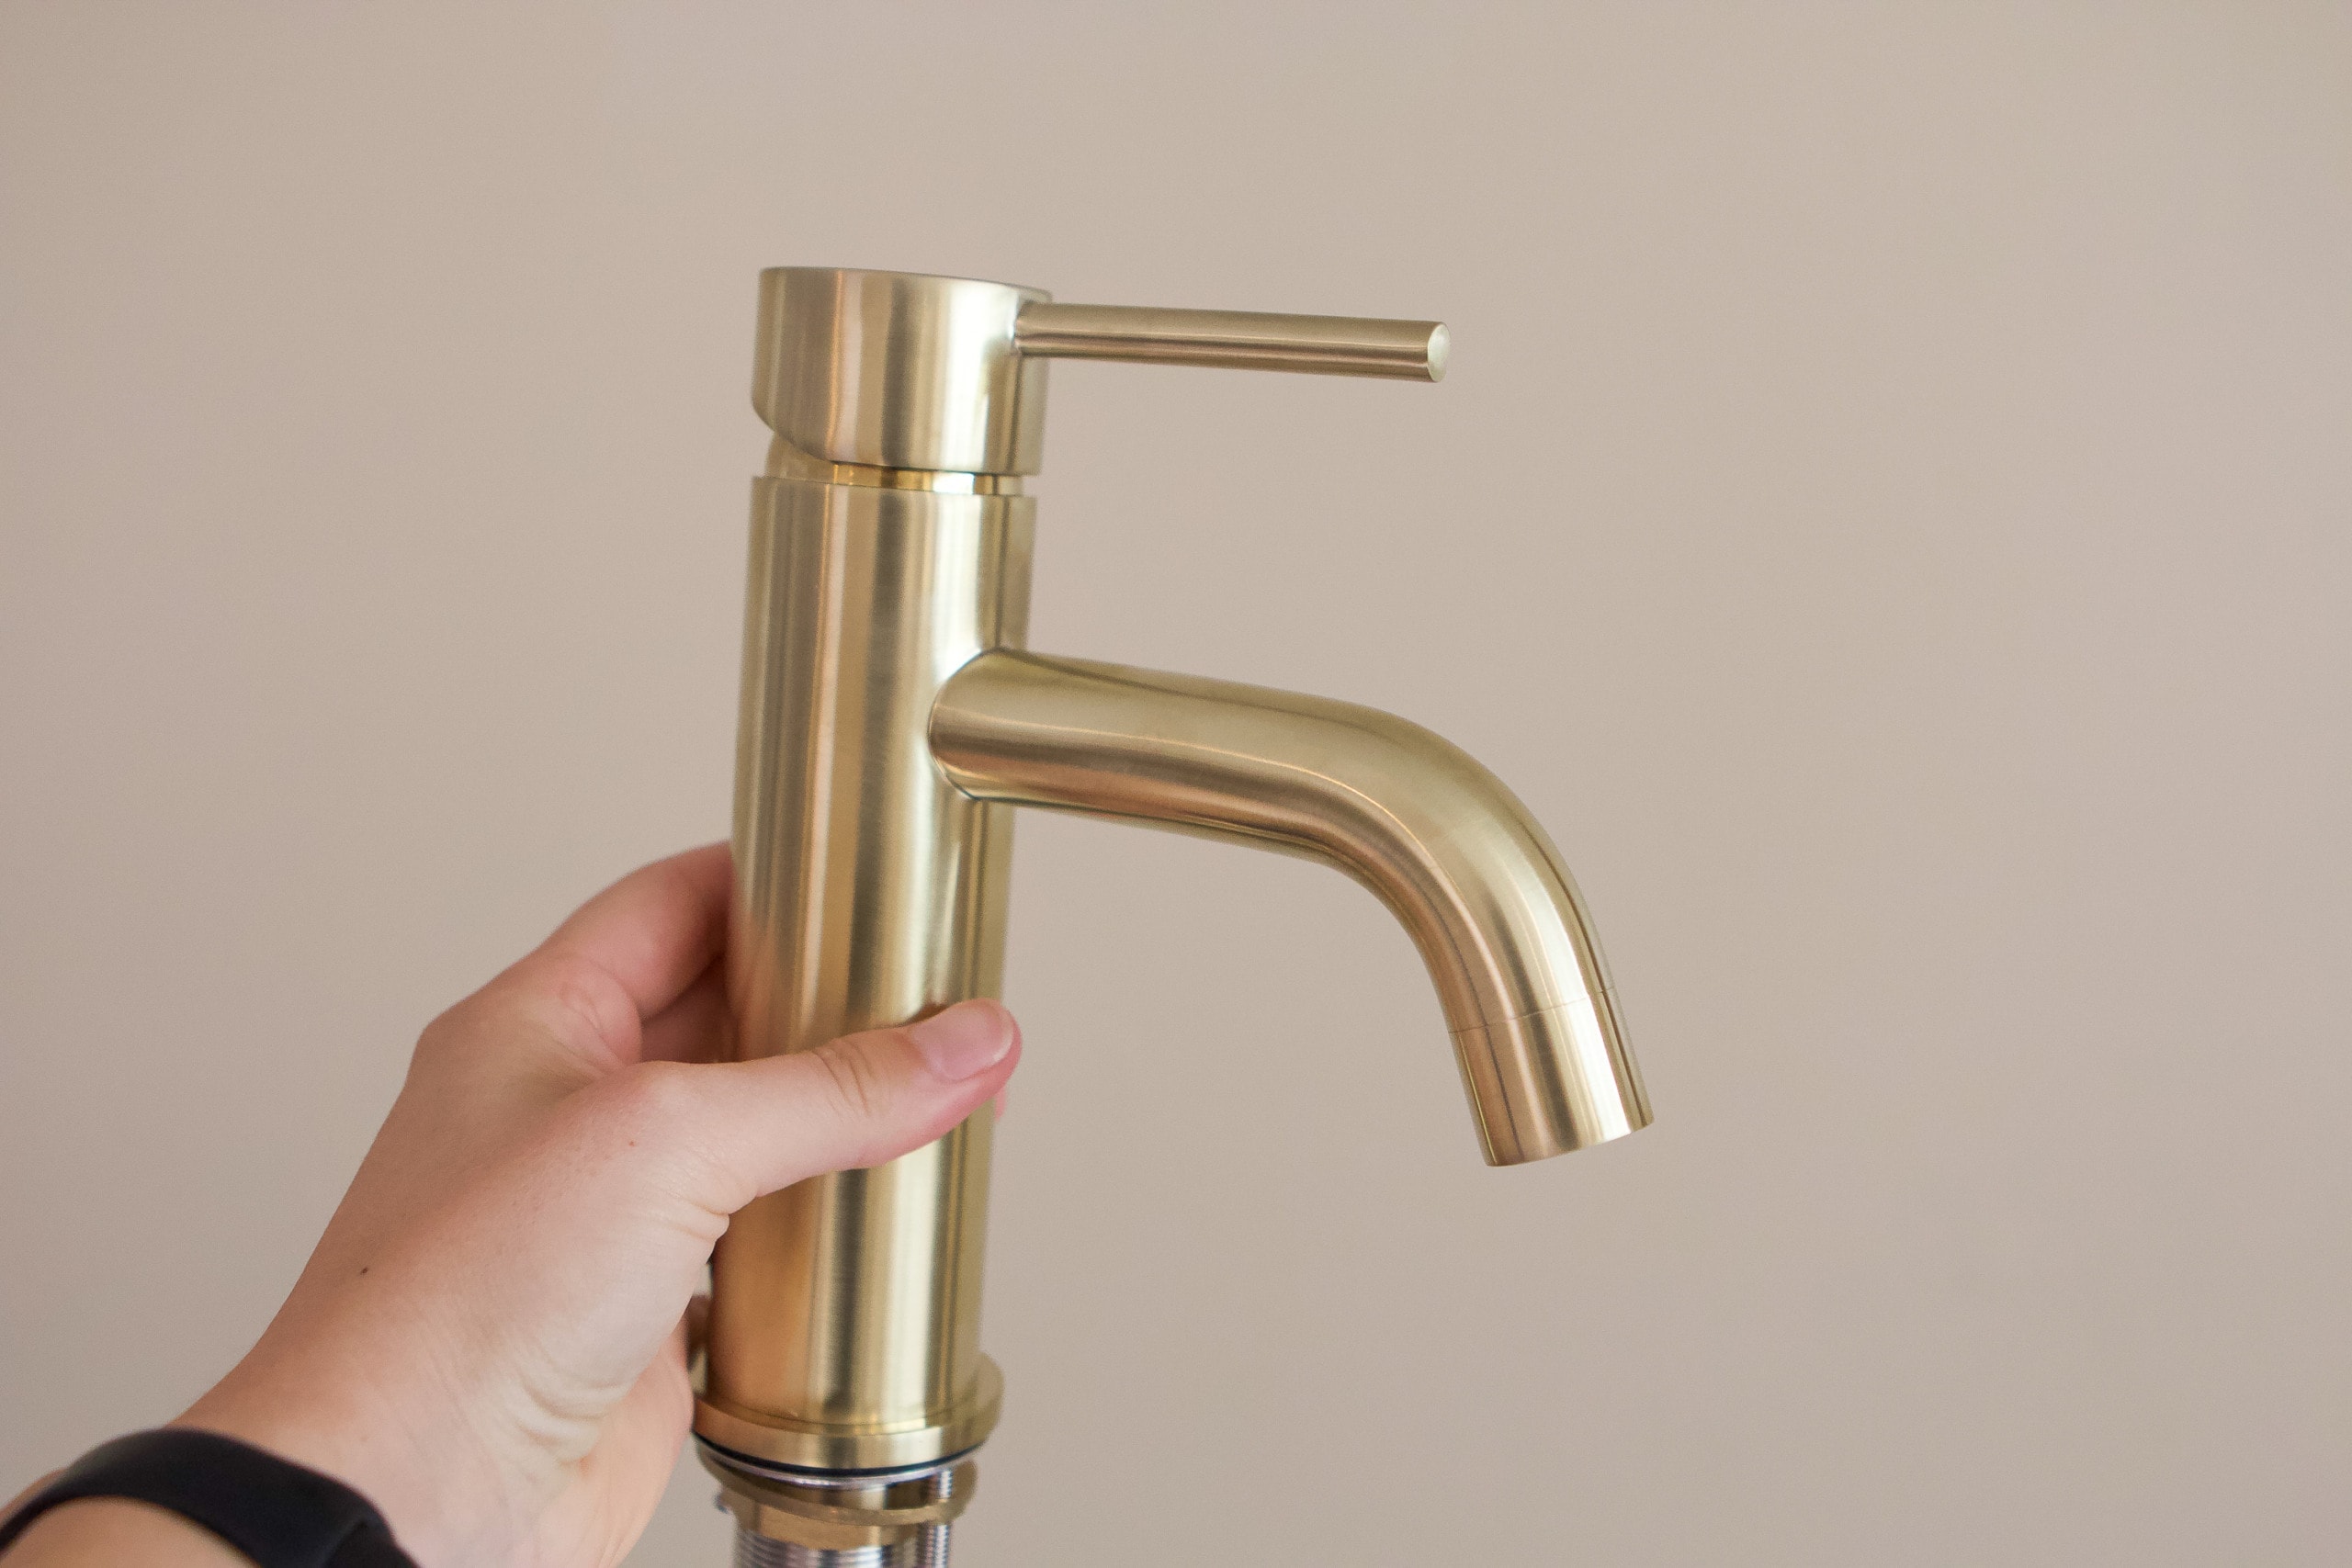 Tips to install a new bathroom faucet